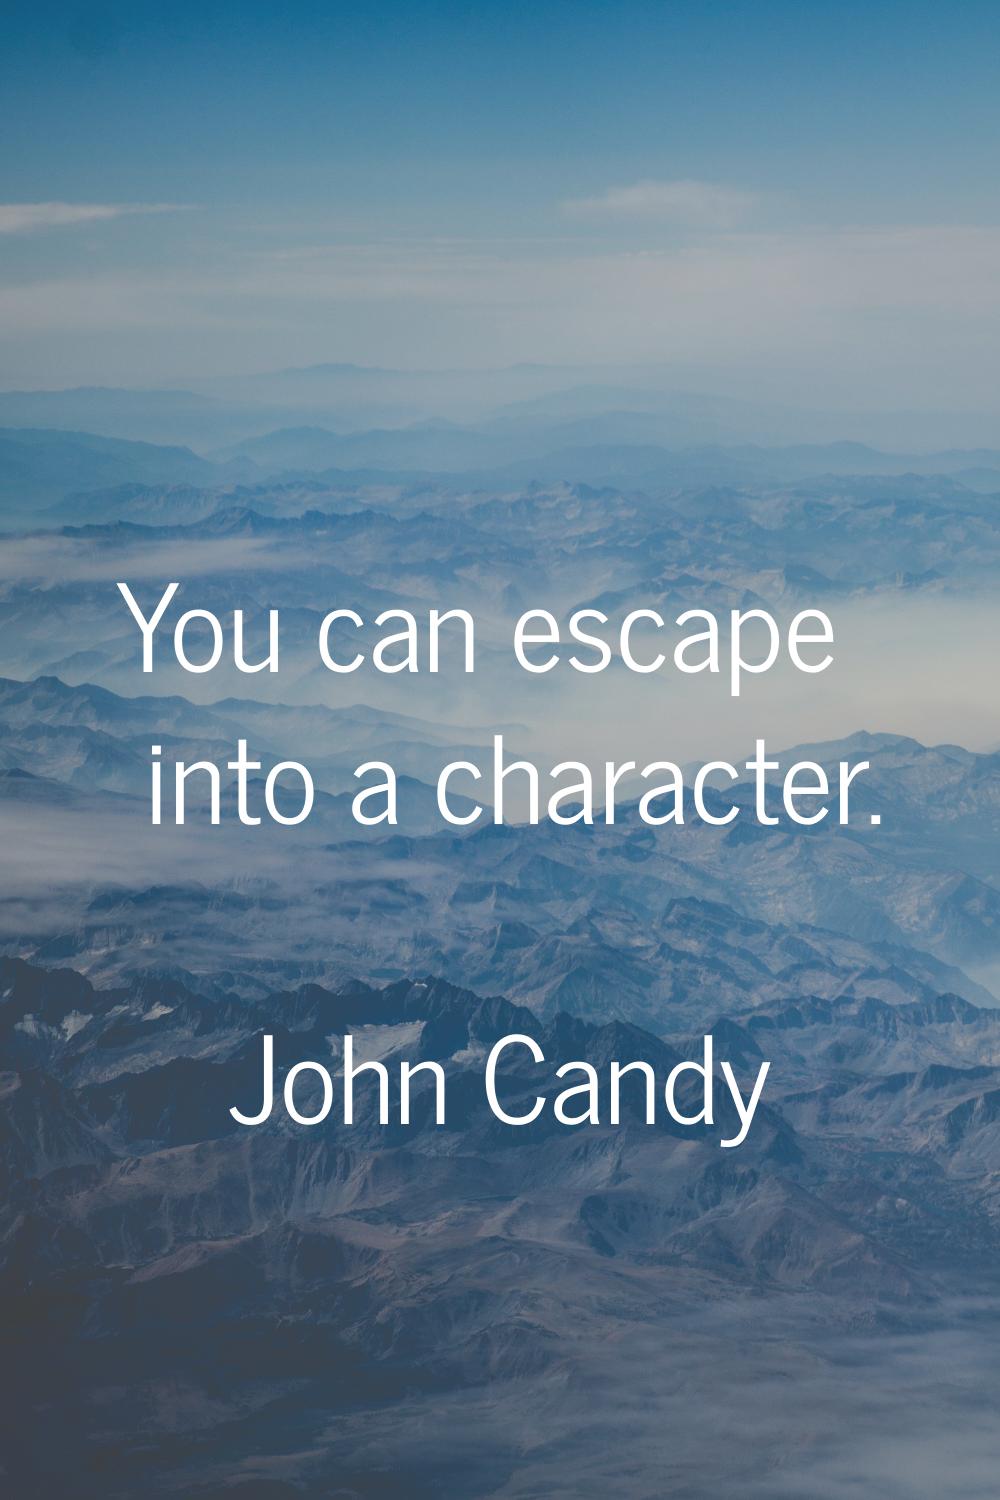 You can escape into a character.